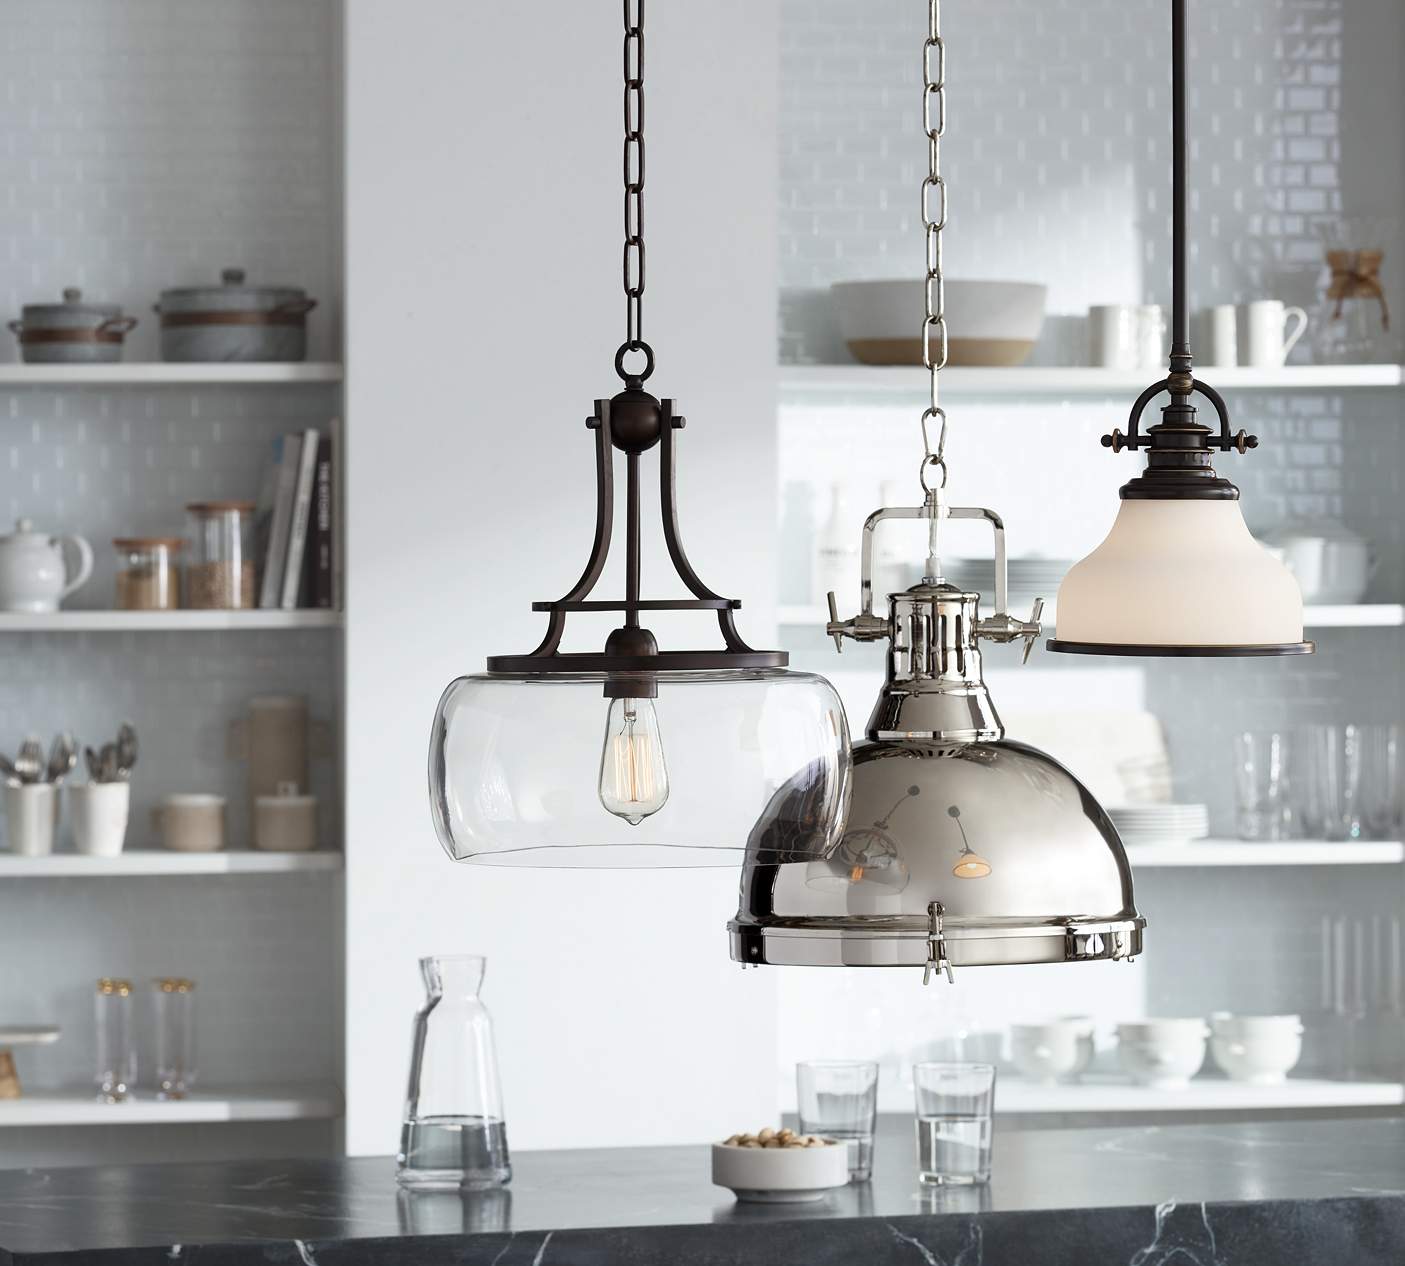 How To Hang Pendant Lights In Kitchen?